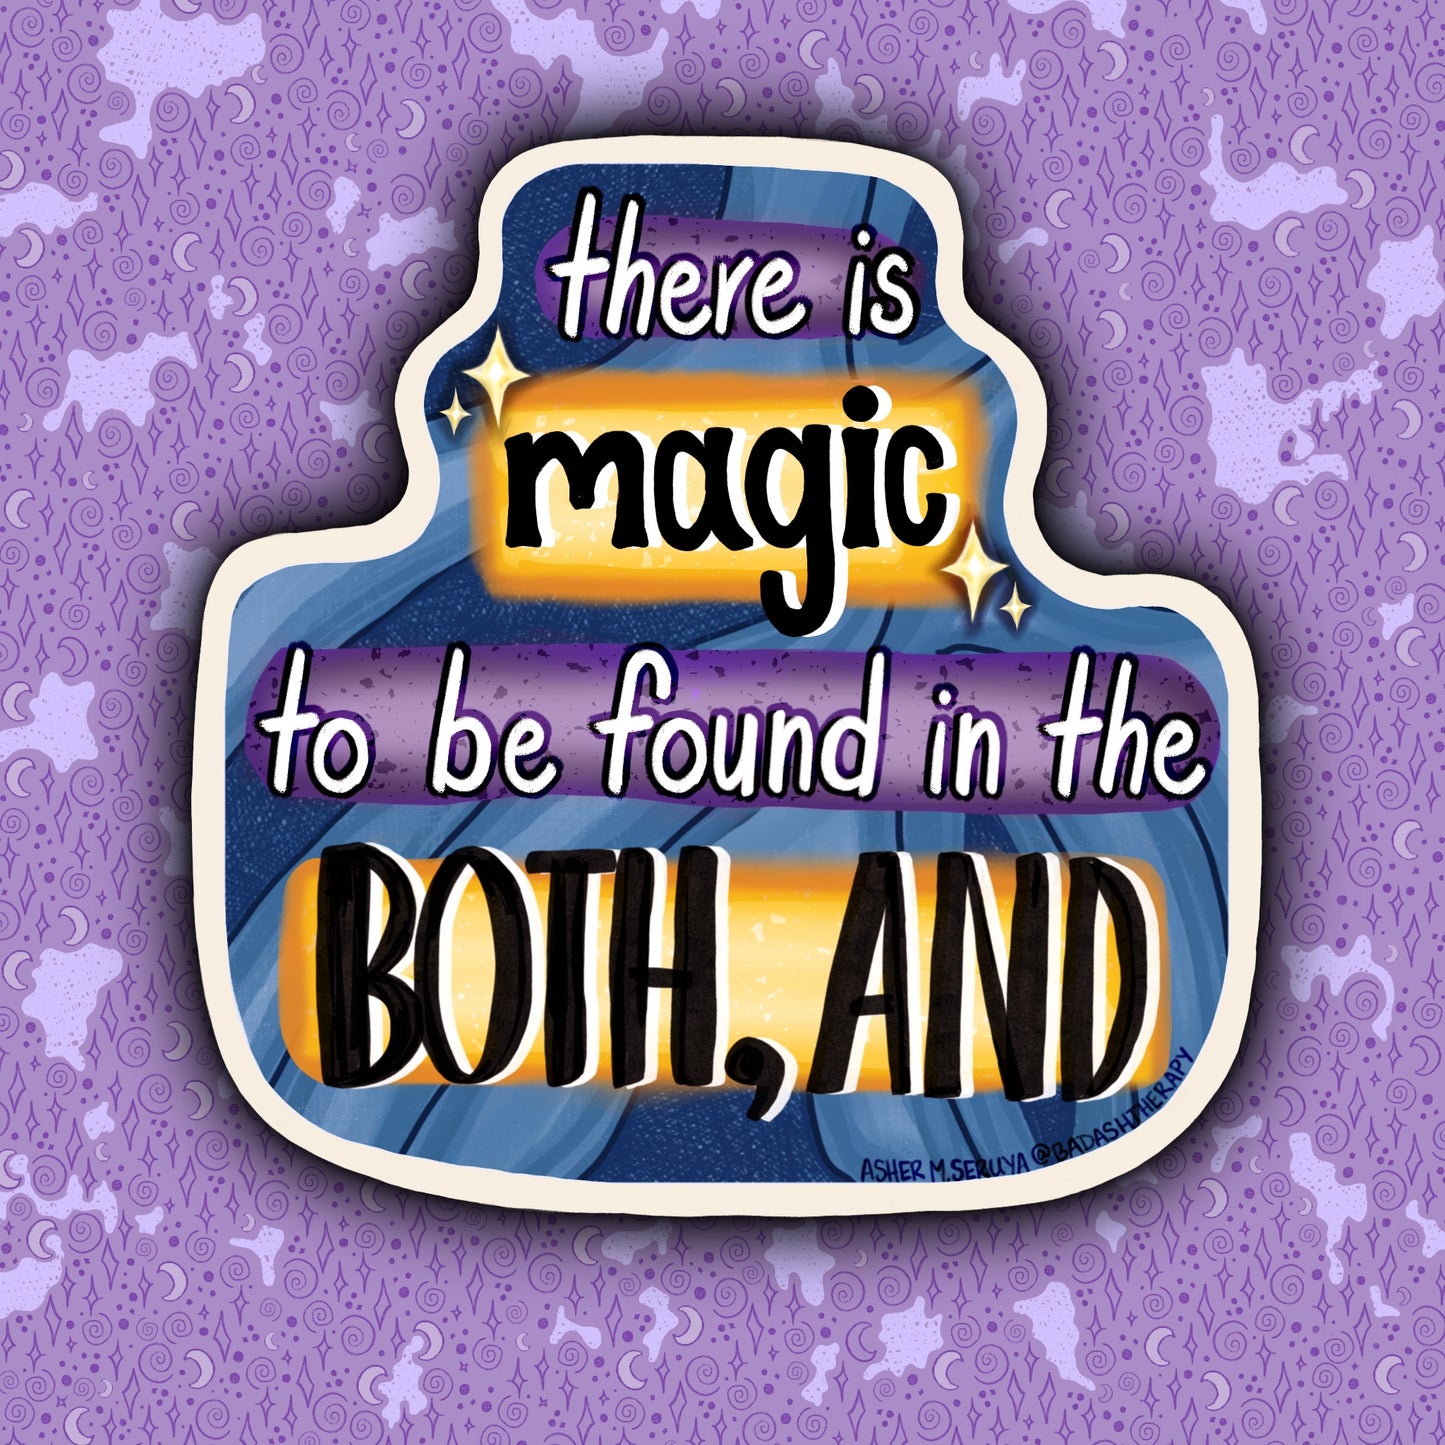 Magic in the Both, And